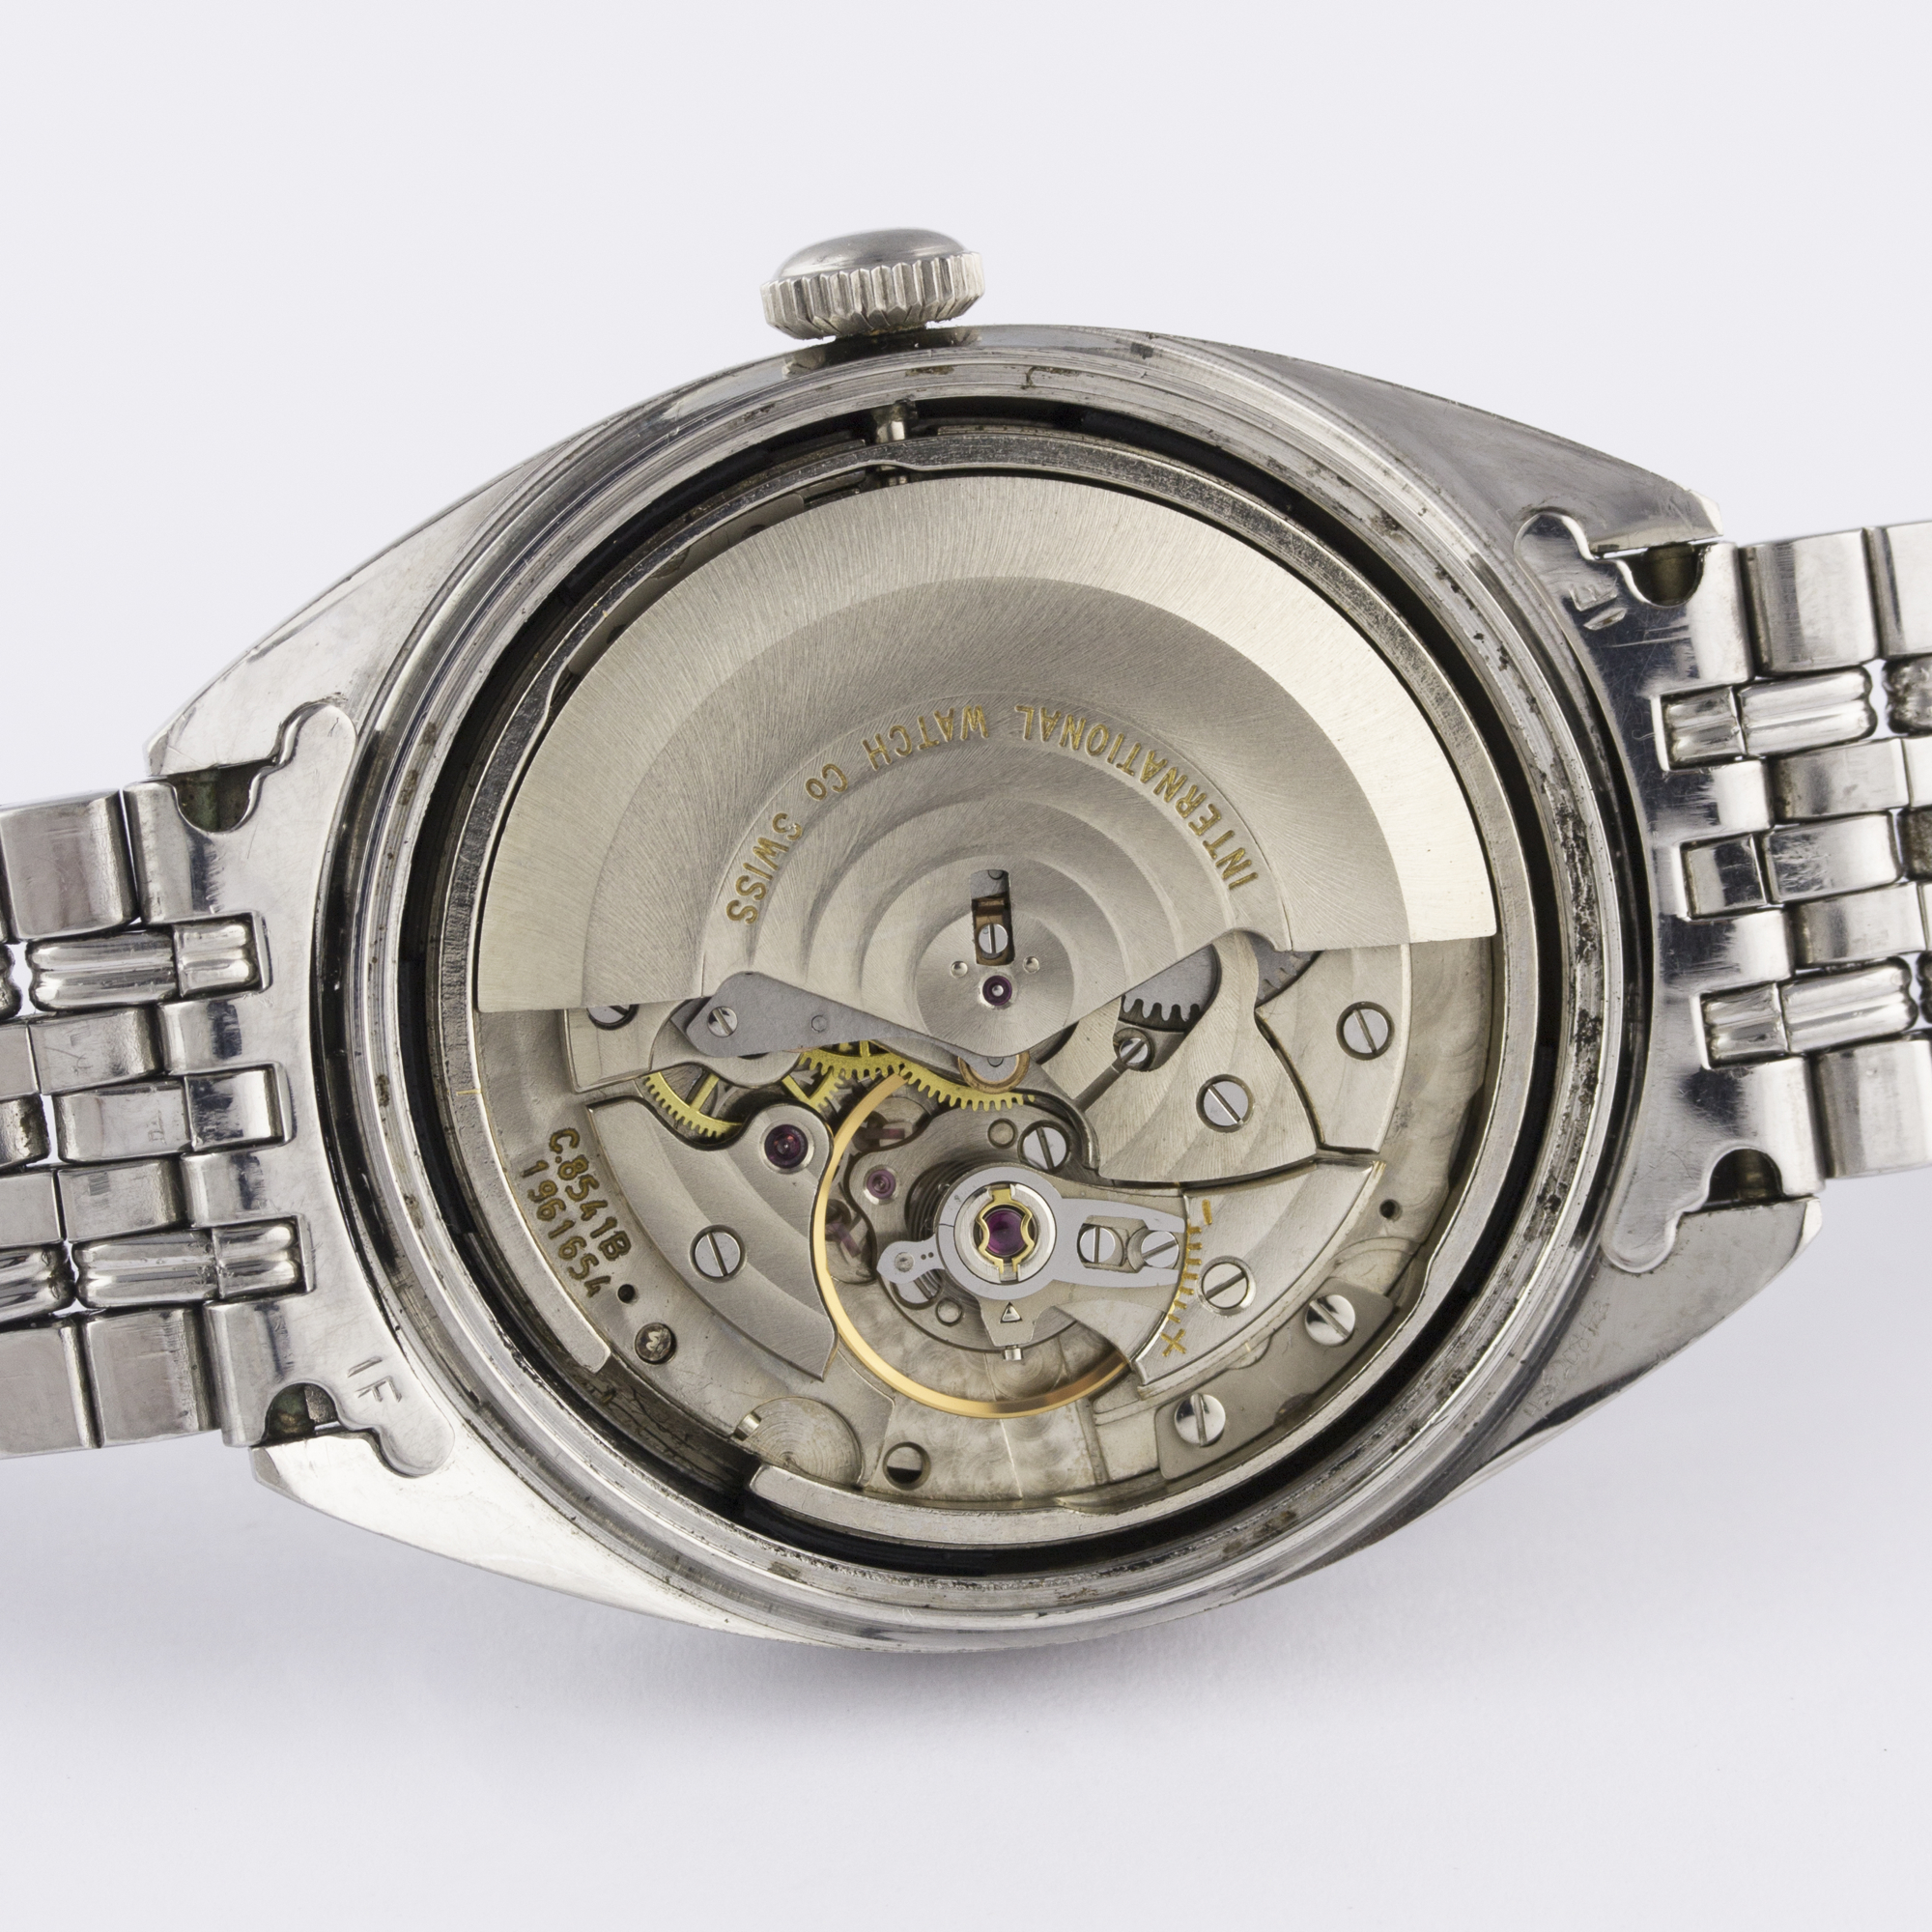 A RARE GENTLEMAN'S STAINLESS STEEL IWC YACHT CLUB AUTOMATIC BRACELET WATCH CIRCA 1971, REF. R811 - Image 8 of 11